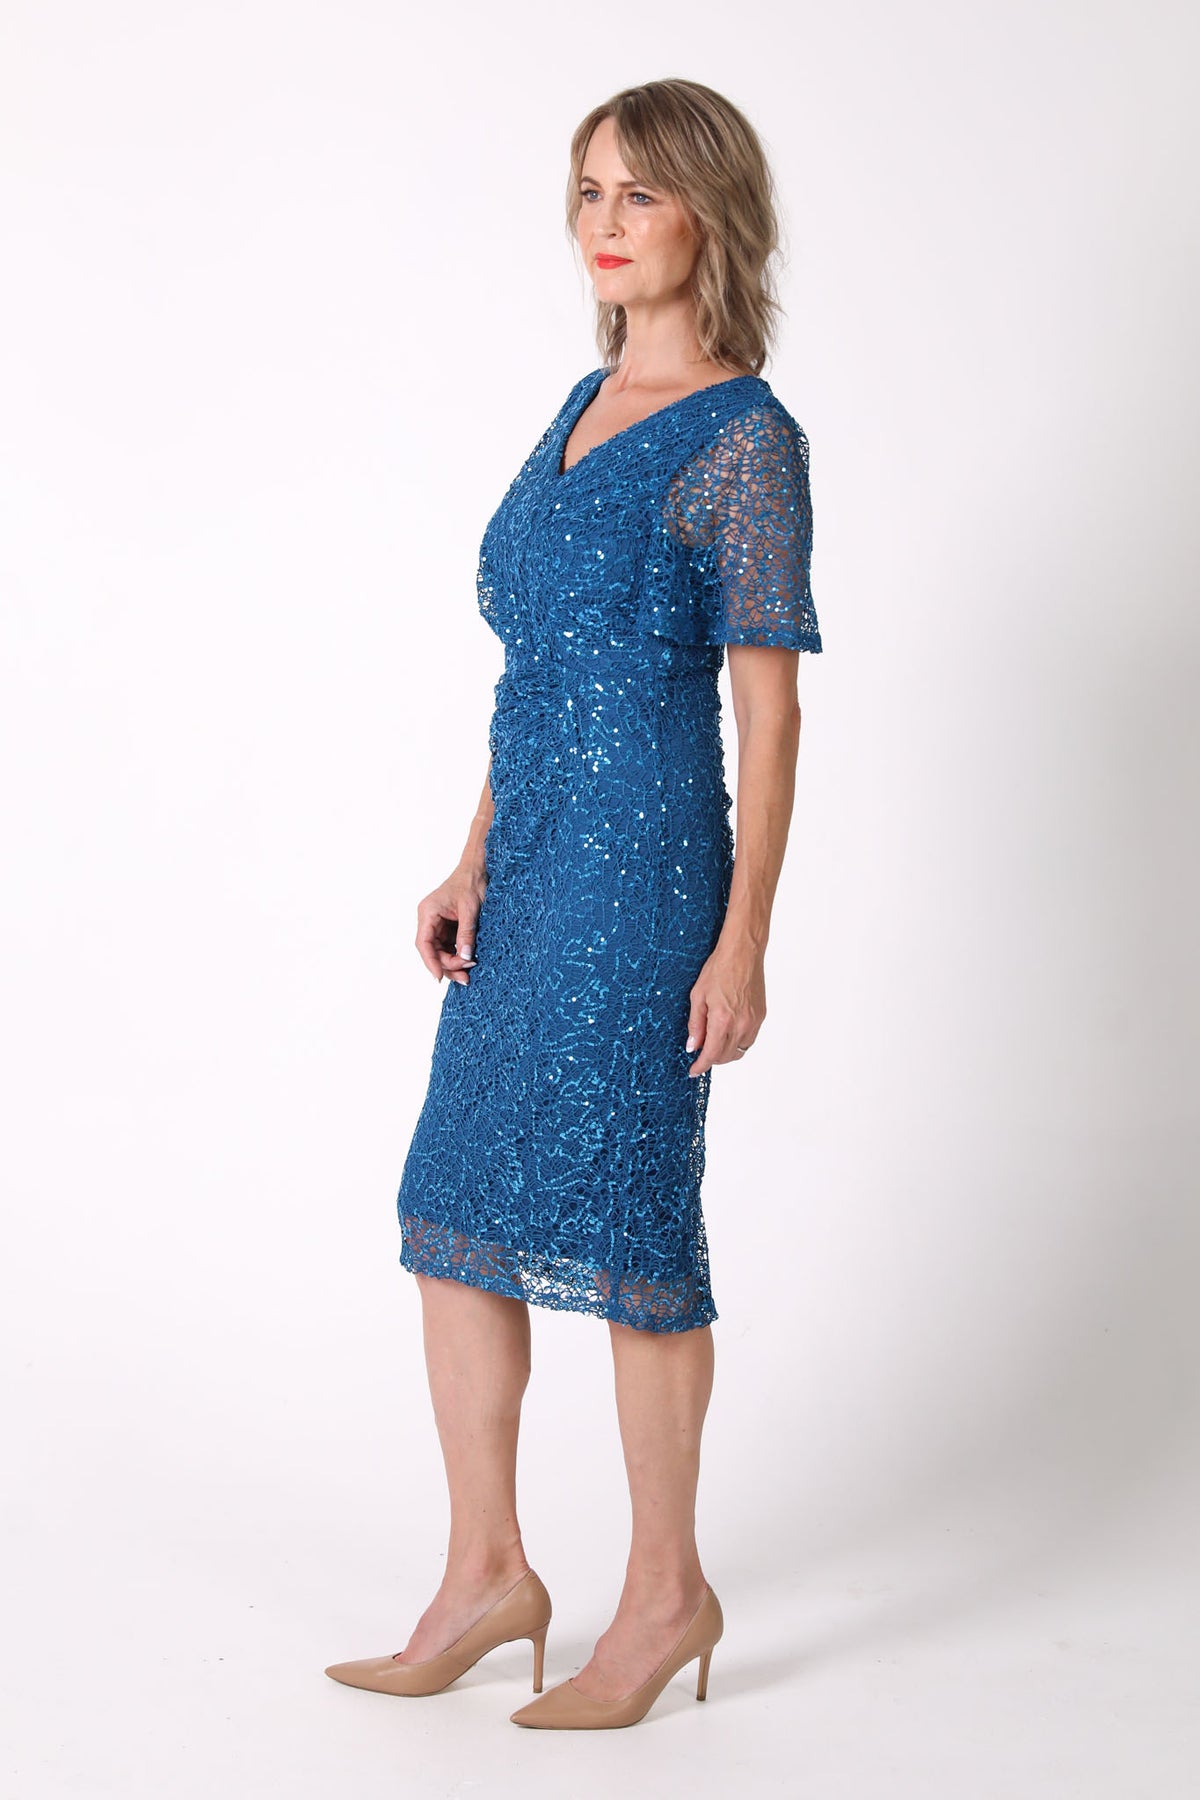 Mature woman sequin cocktail dress with V neckline and butterfly sleeves in teal color